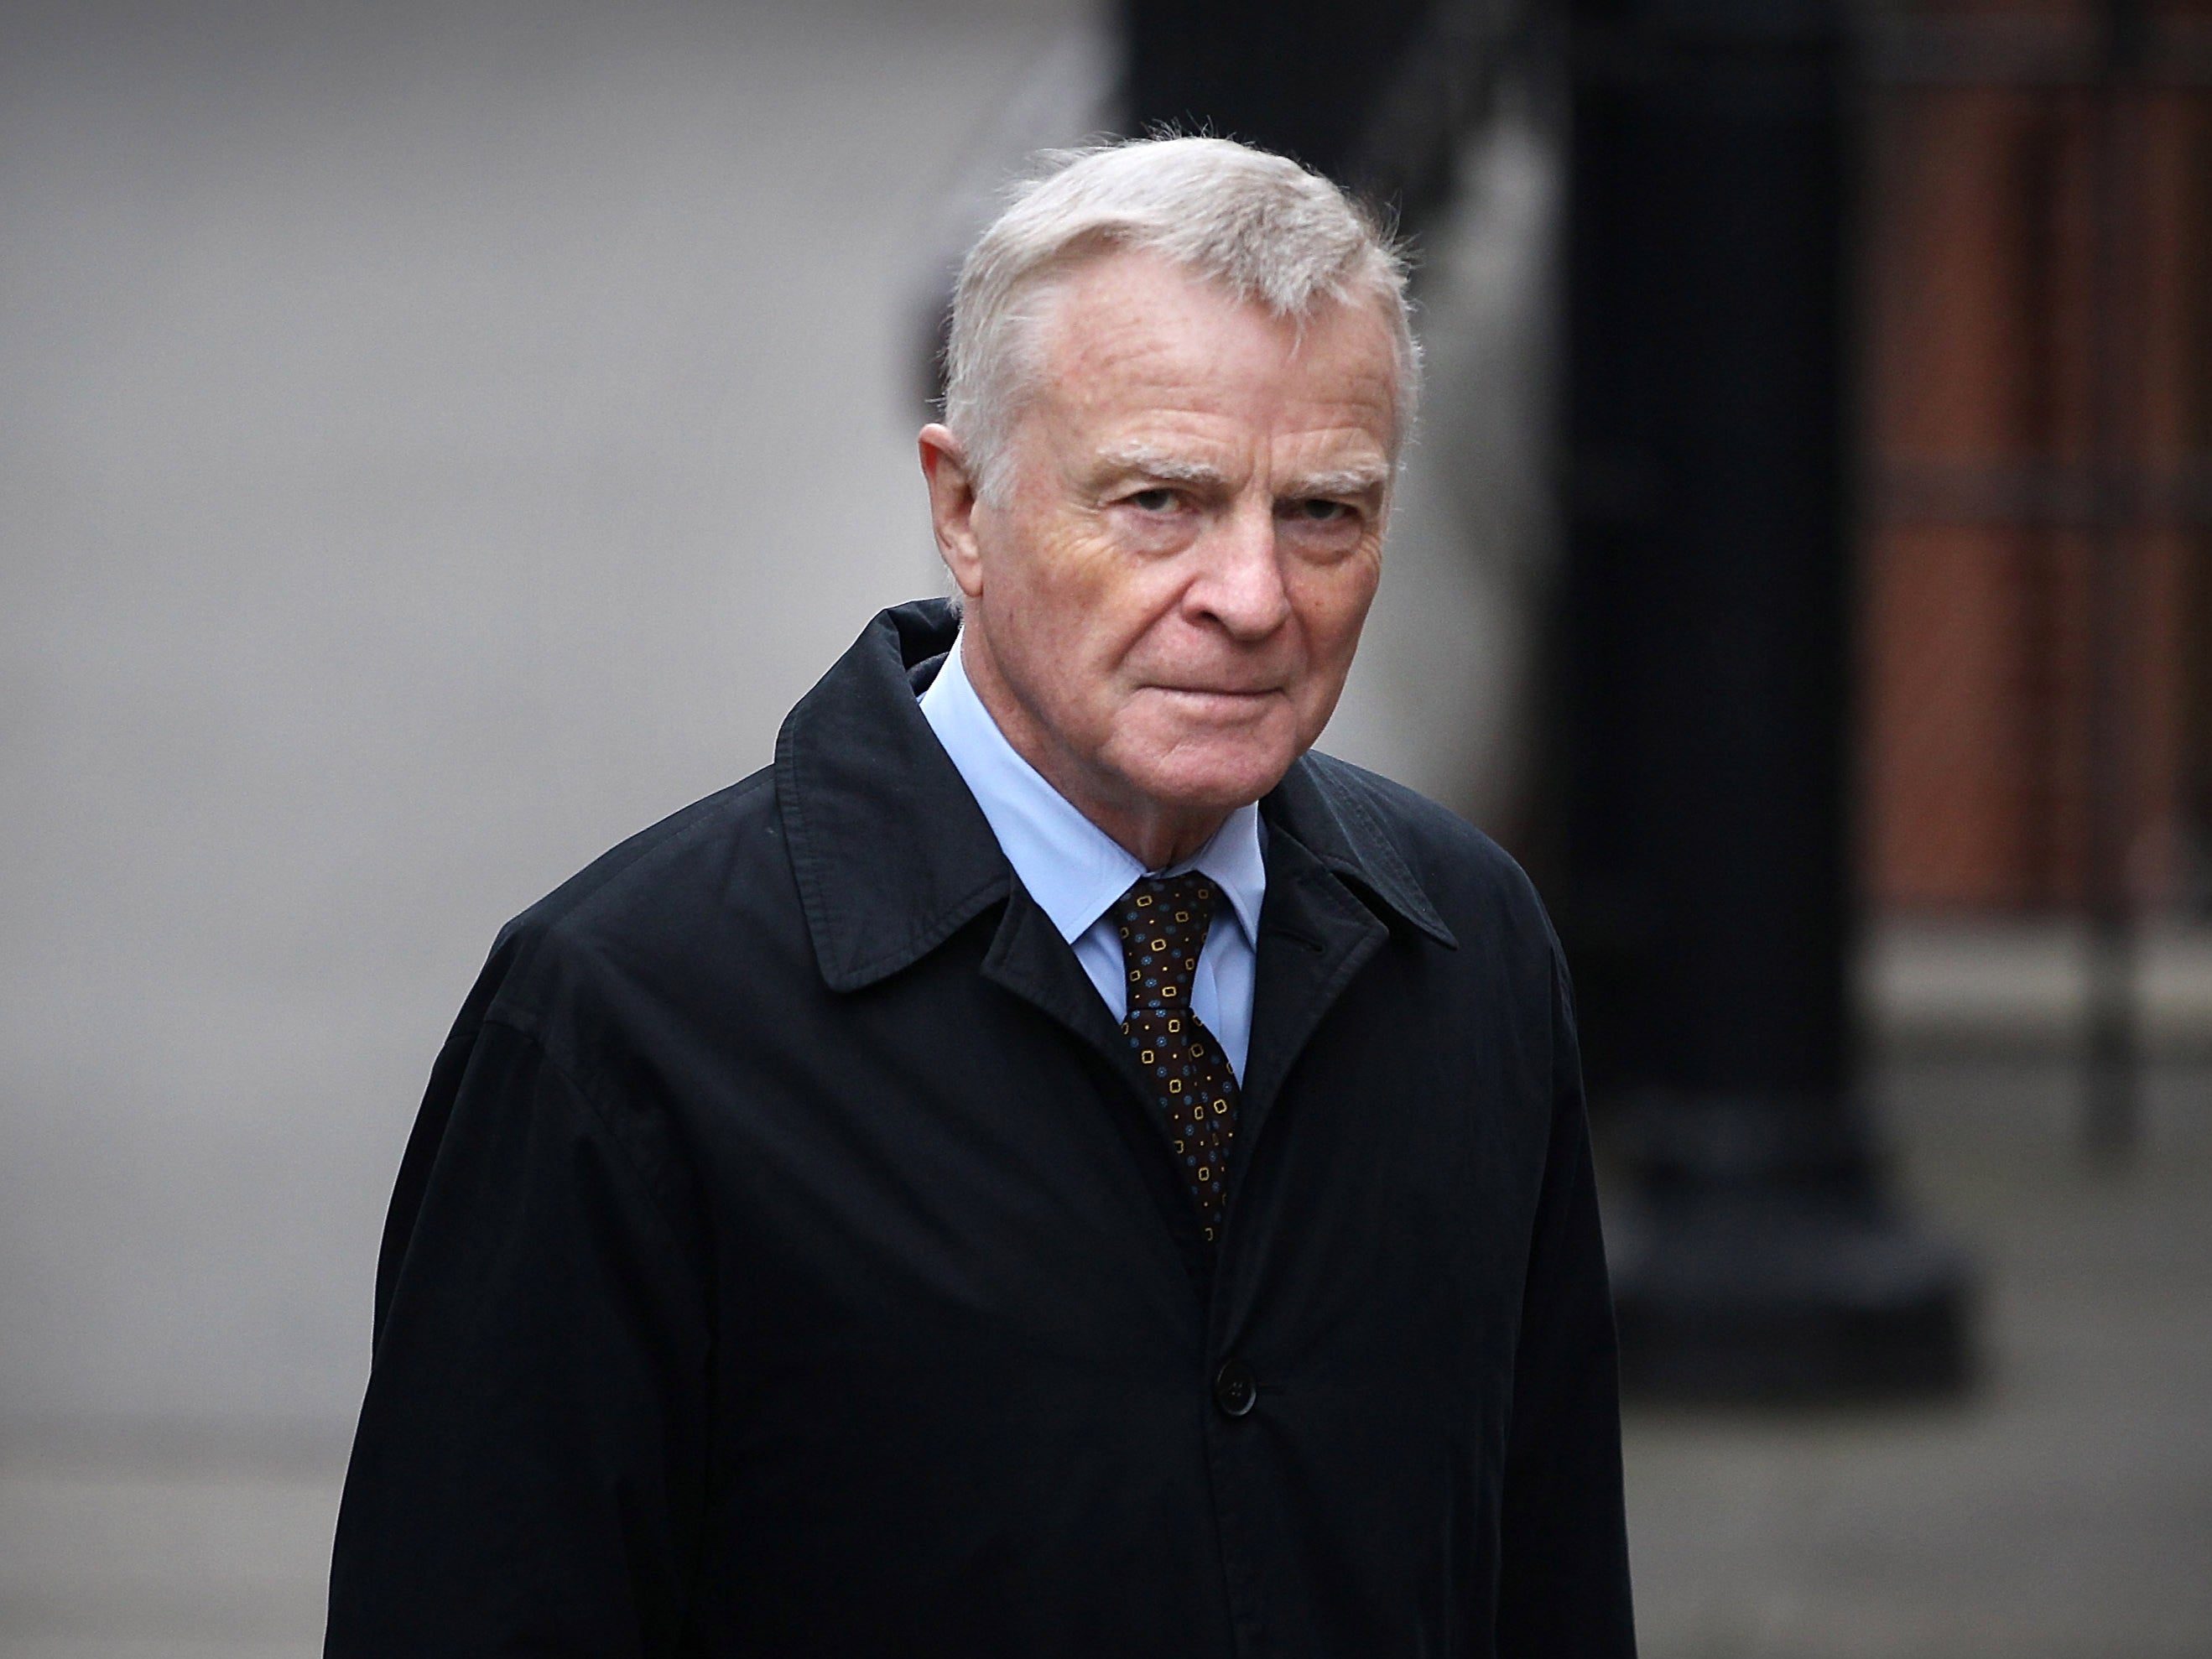 Max Mosley died earlier this year